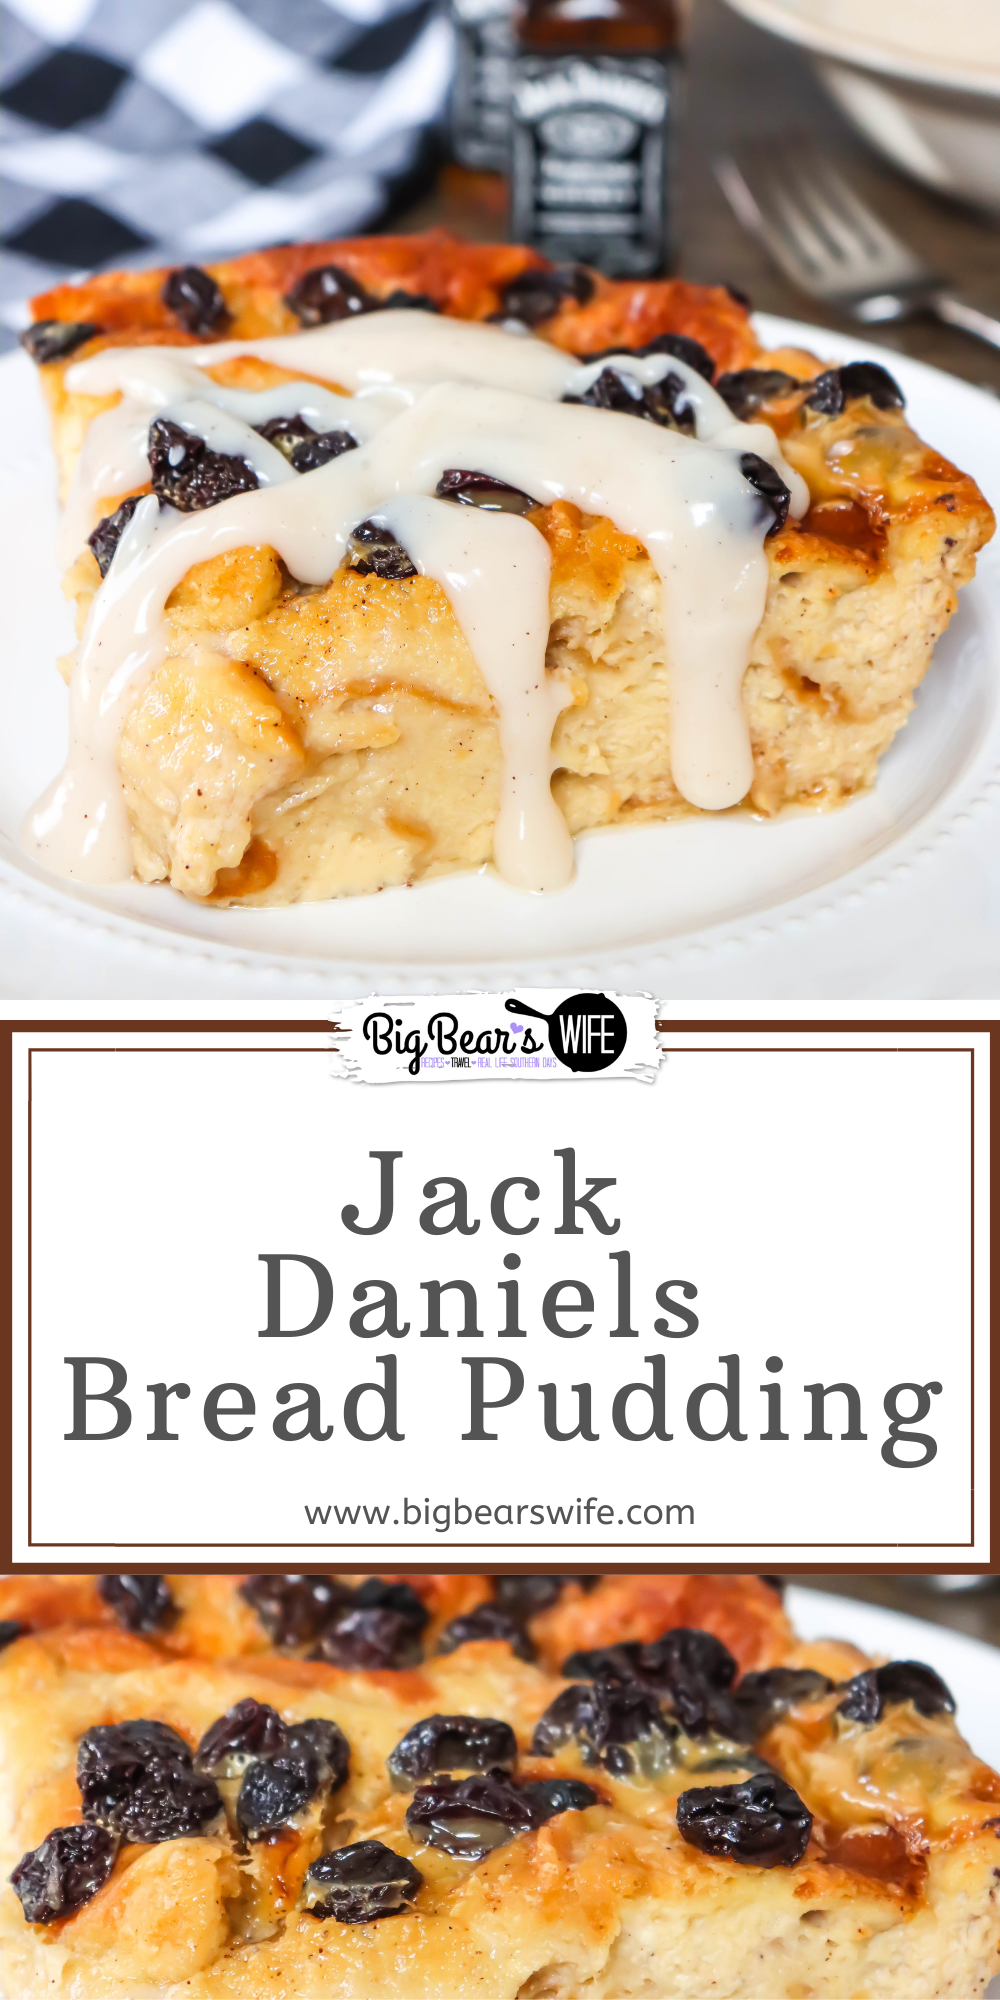 This Jack Daniels Bread Pudding is a family favorite that was passed down to me years ago from a chef at one of my favorite restaurants.  It's a creamy, custard cinnamon bread pudding topped with raisins and the most amazing homemade Jack Daniels Sauce!  via @bigbearswife